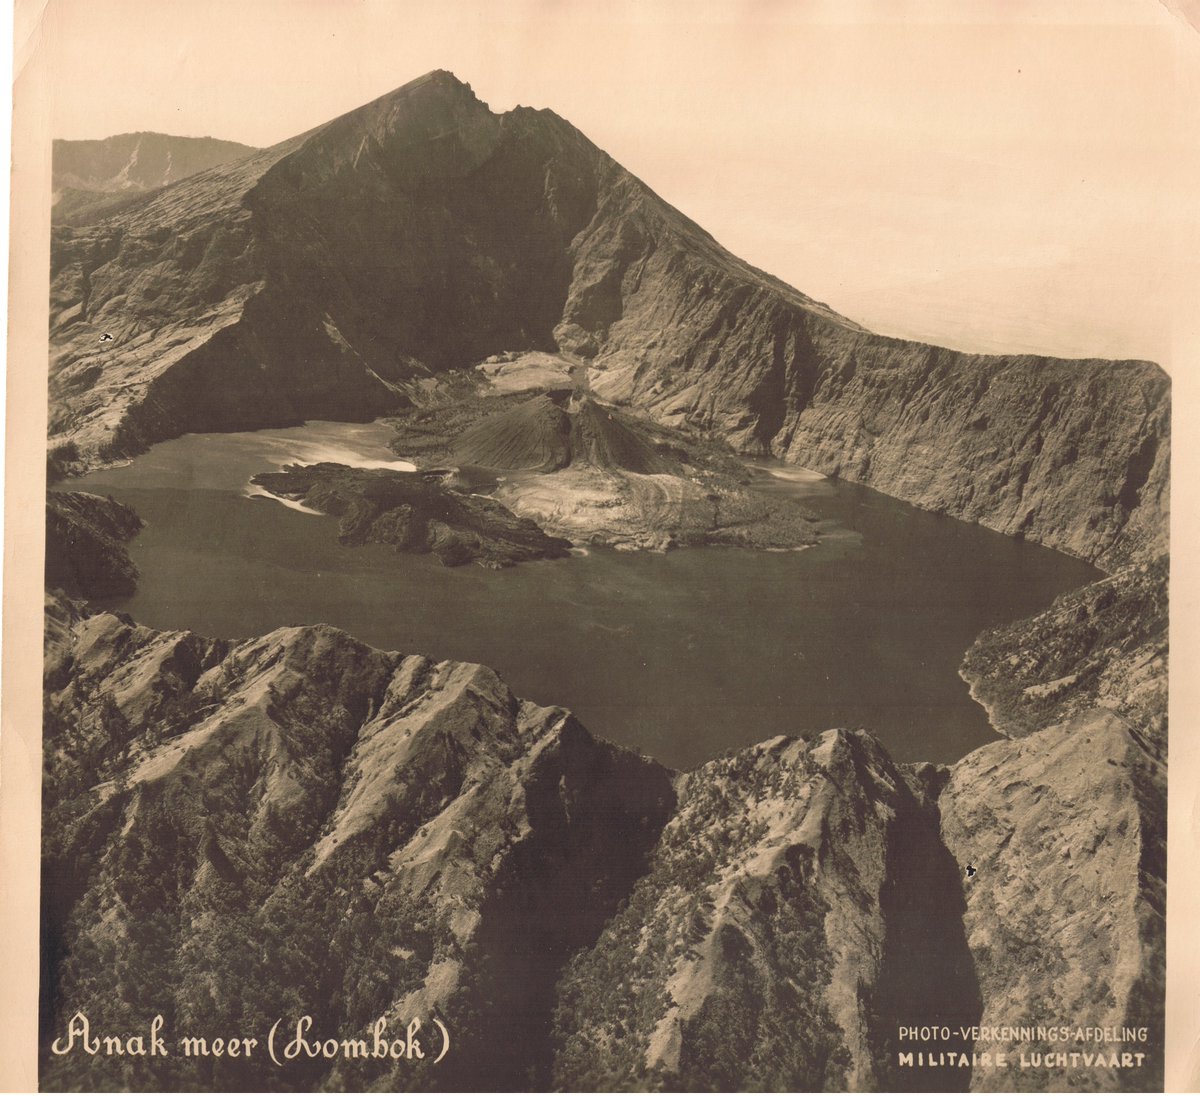 The Anak Krakatau eruption has reminded me of some old photos my dad took back in the early 1940's while stationed in (what was then) the Dutch East Indies, including one of the aforementioned volcano.